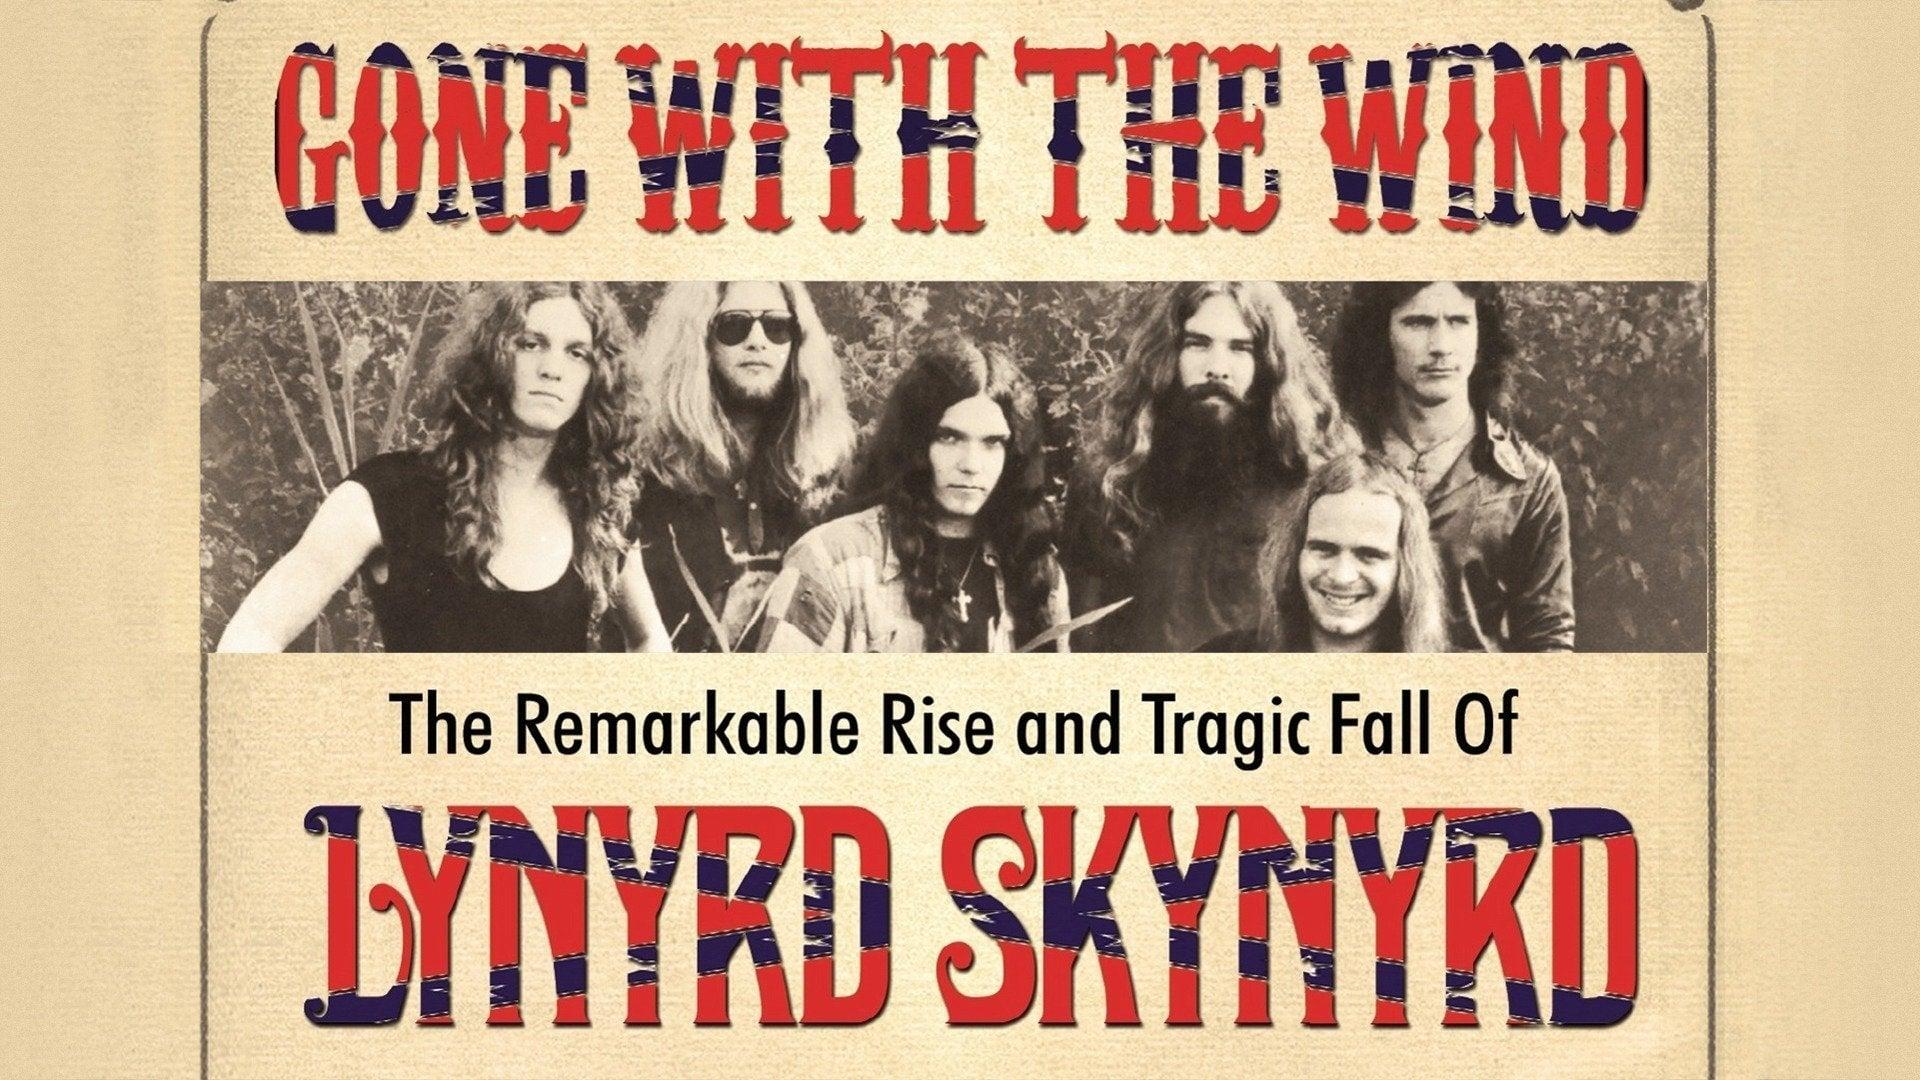 Gone with the Wind: The Remarkable Rise and Tragic Fall of Lynyrd Skynyrd backdrop